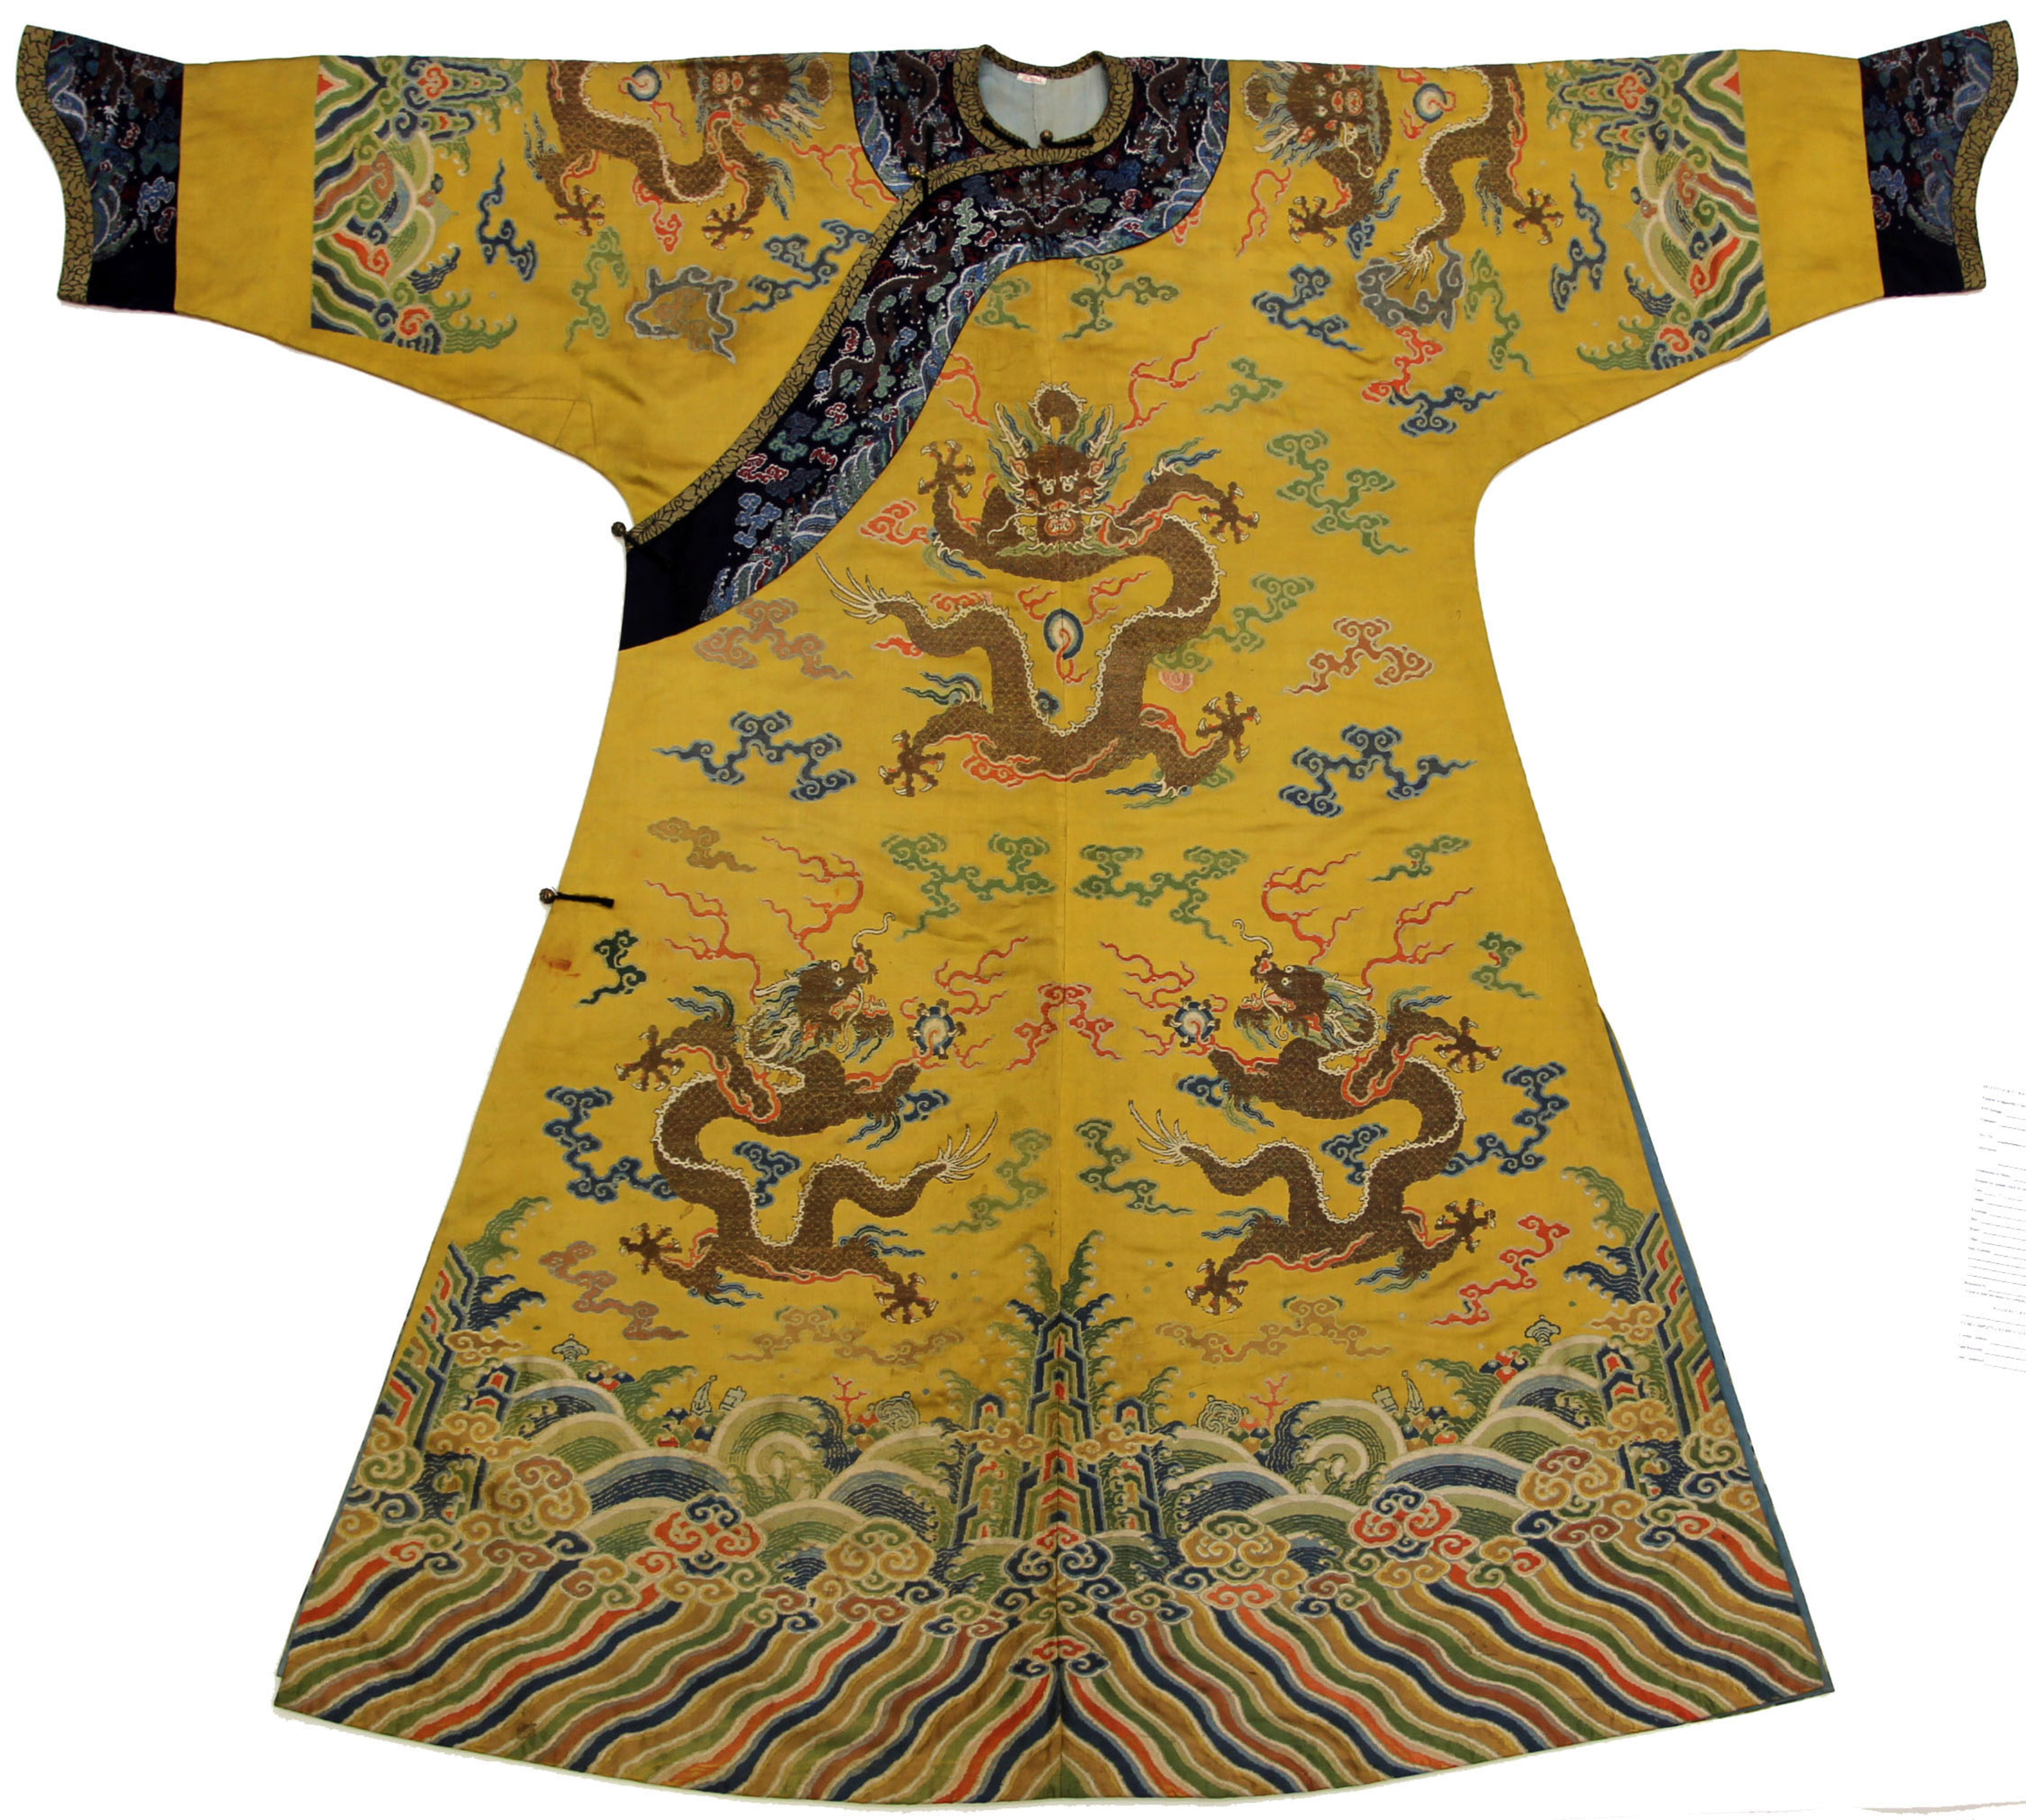 List 99+ Images the “dragon robe” is an example of textile art from the late ming dynasty. Updated